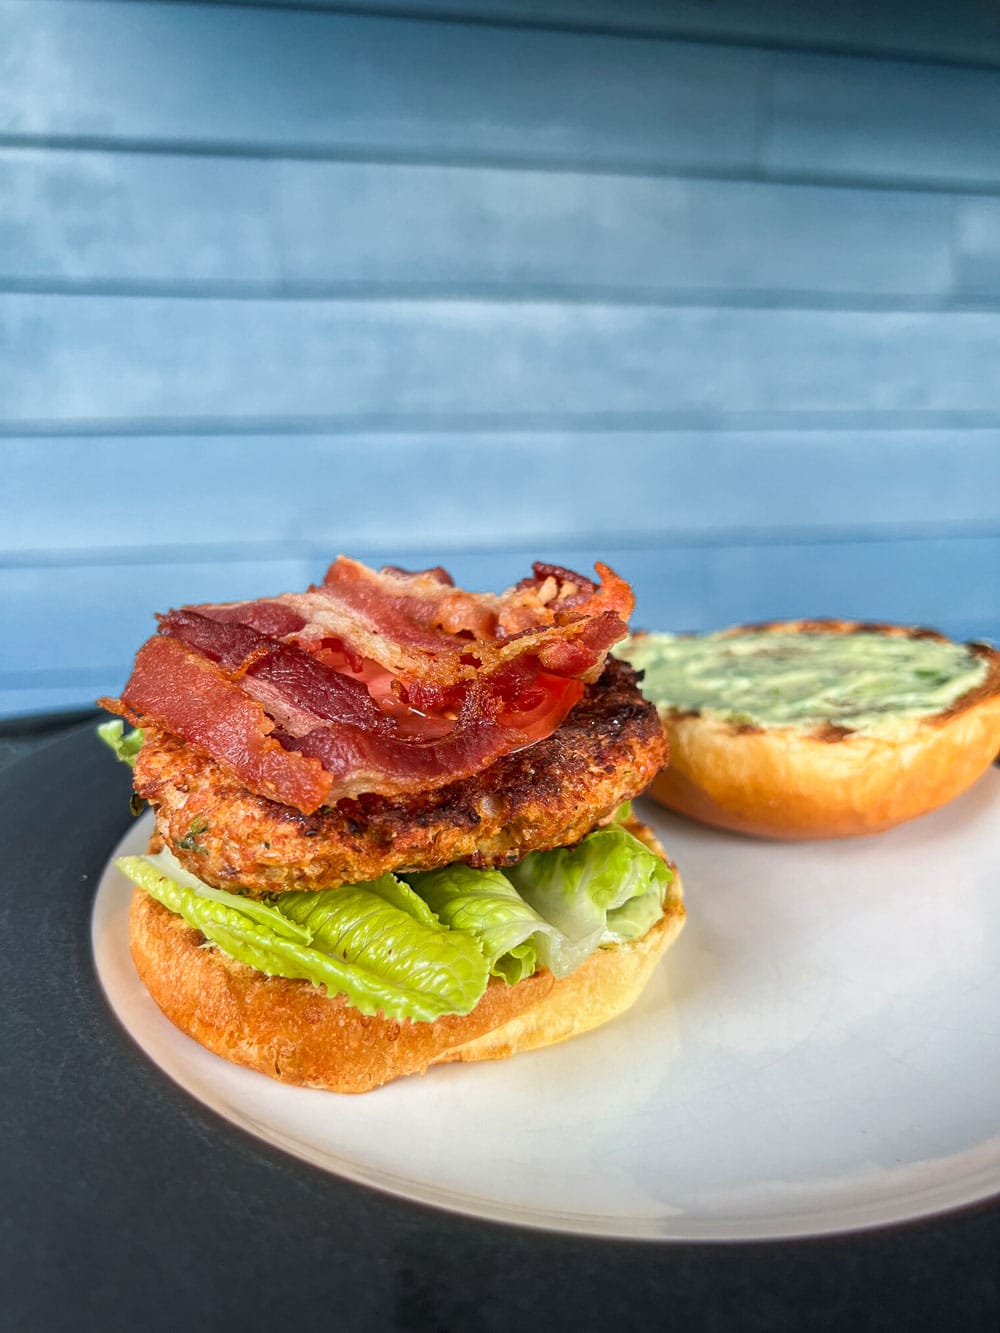 BLT salmon burgers, 4th of July grilling recipes inspired by the national parks